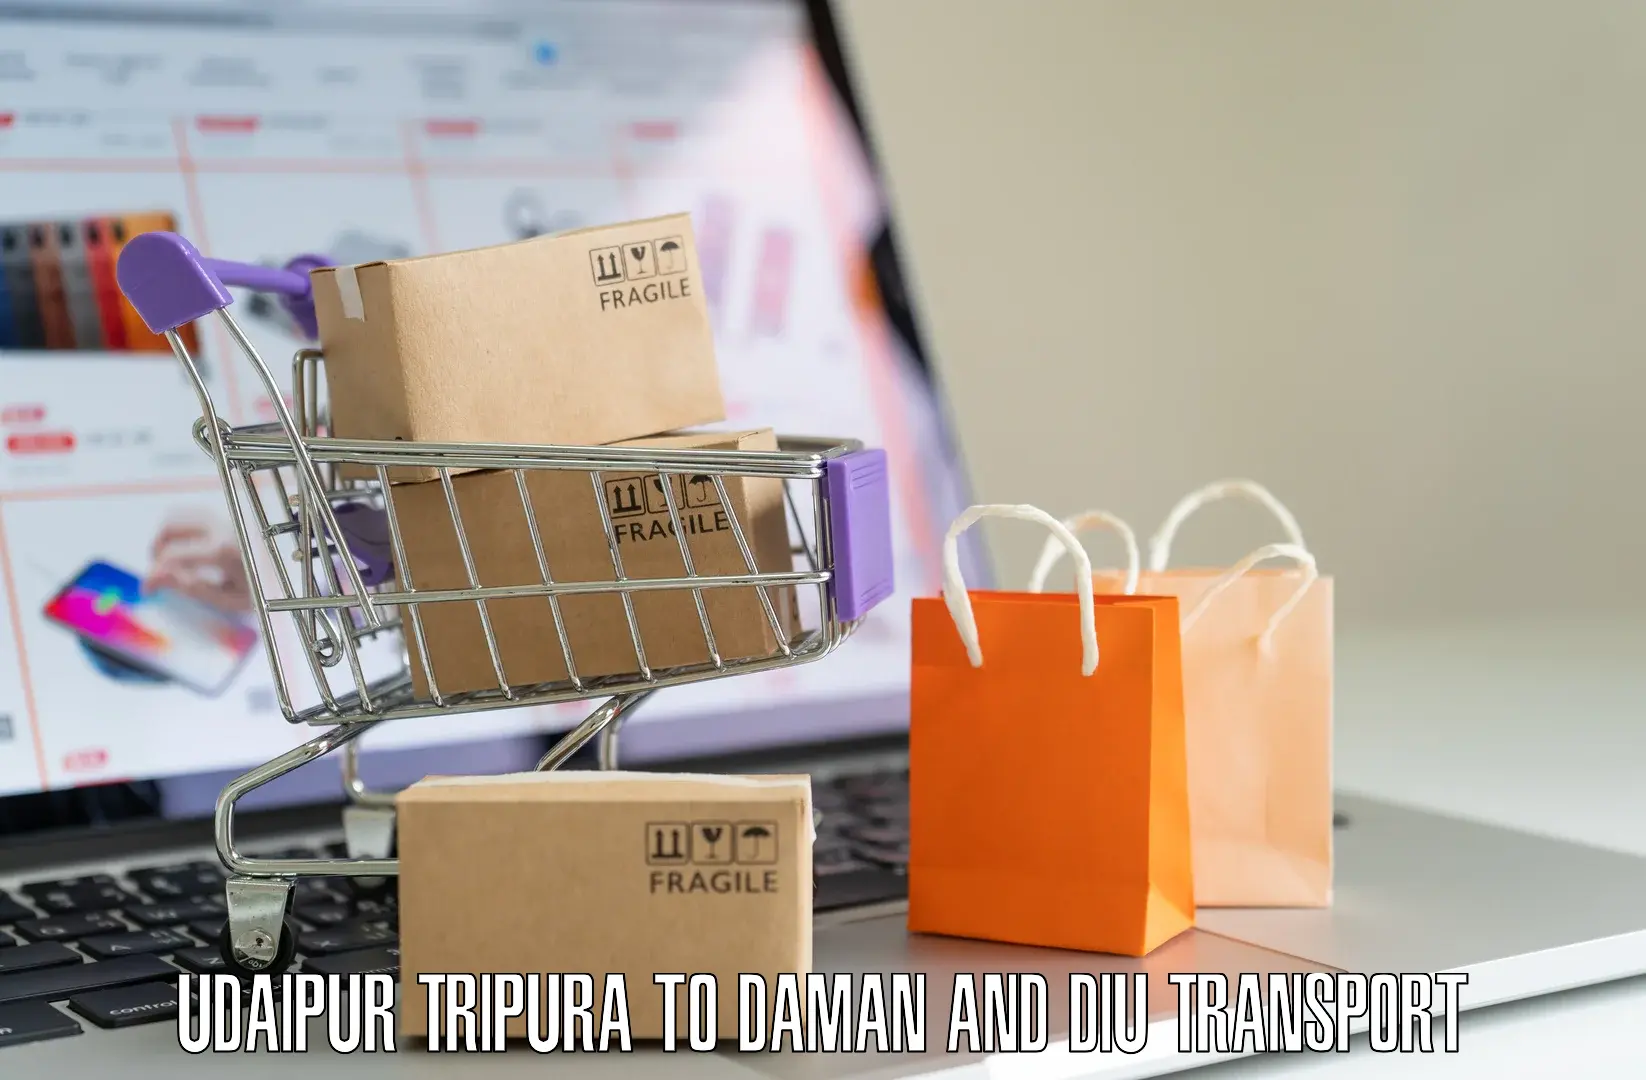 Domestic goods transportation services Udaipur Tripura to Daman and Diu